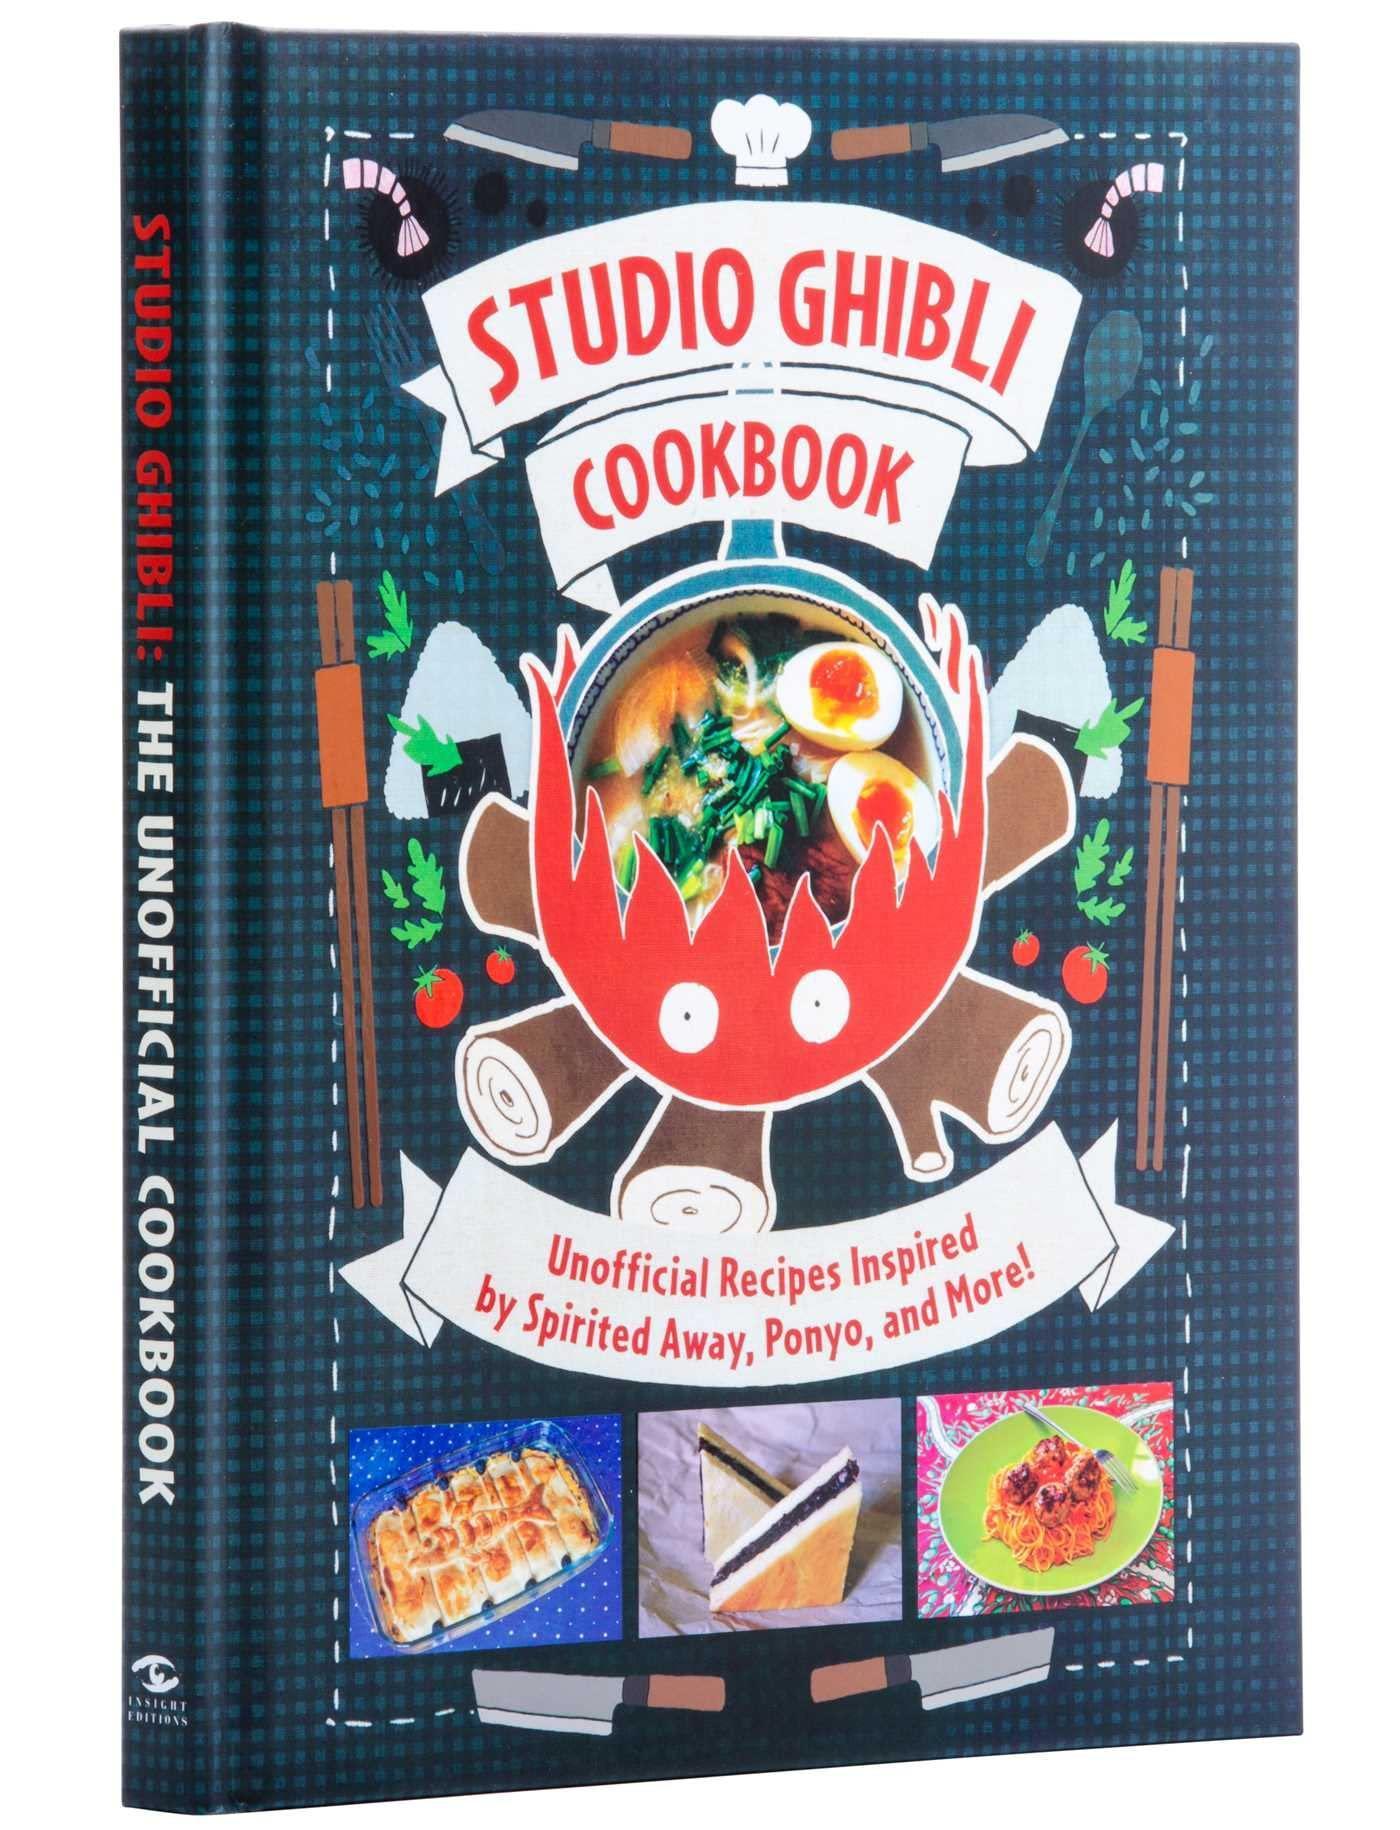 Studio Ghibli Cookbook: Unofficial Recipes Inspired by Spirited Away, Ponyo, and More! (Novelty) - Tankobonbon